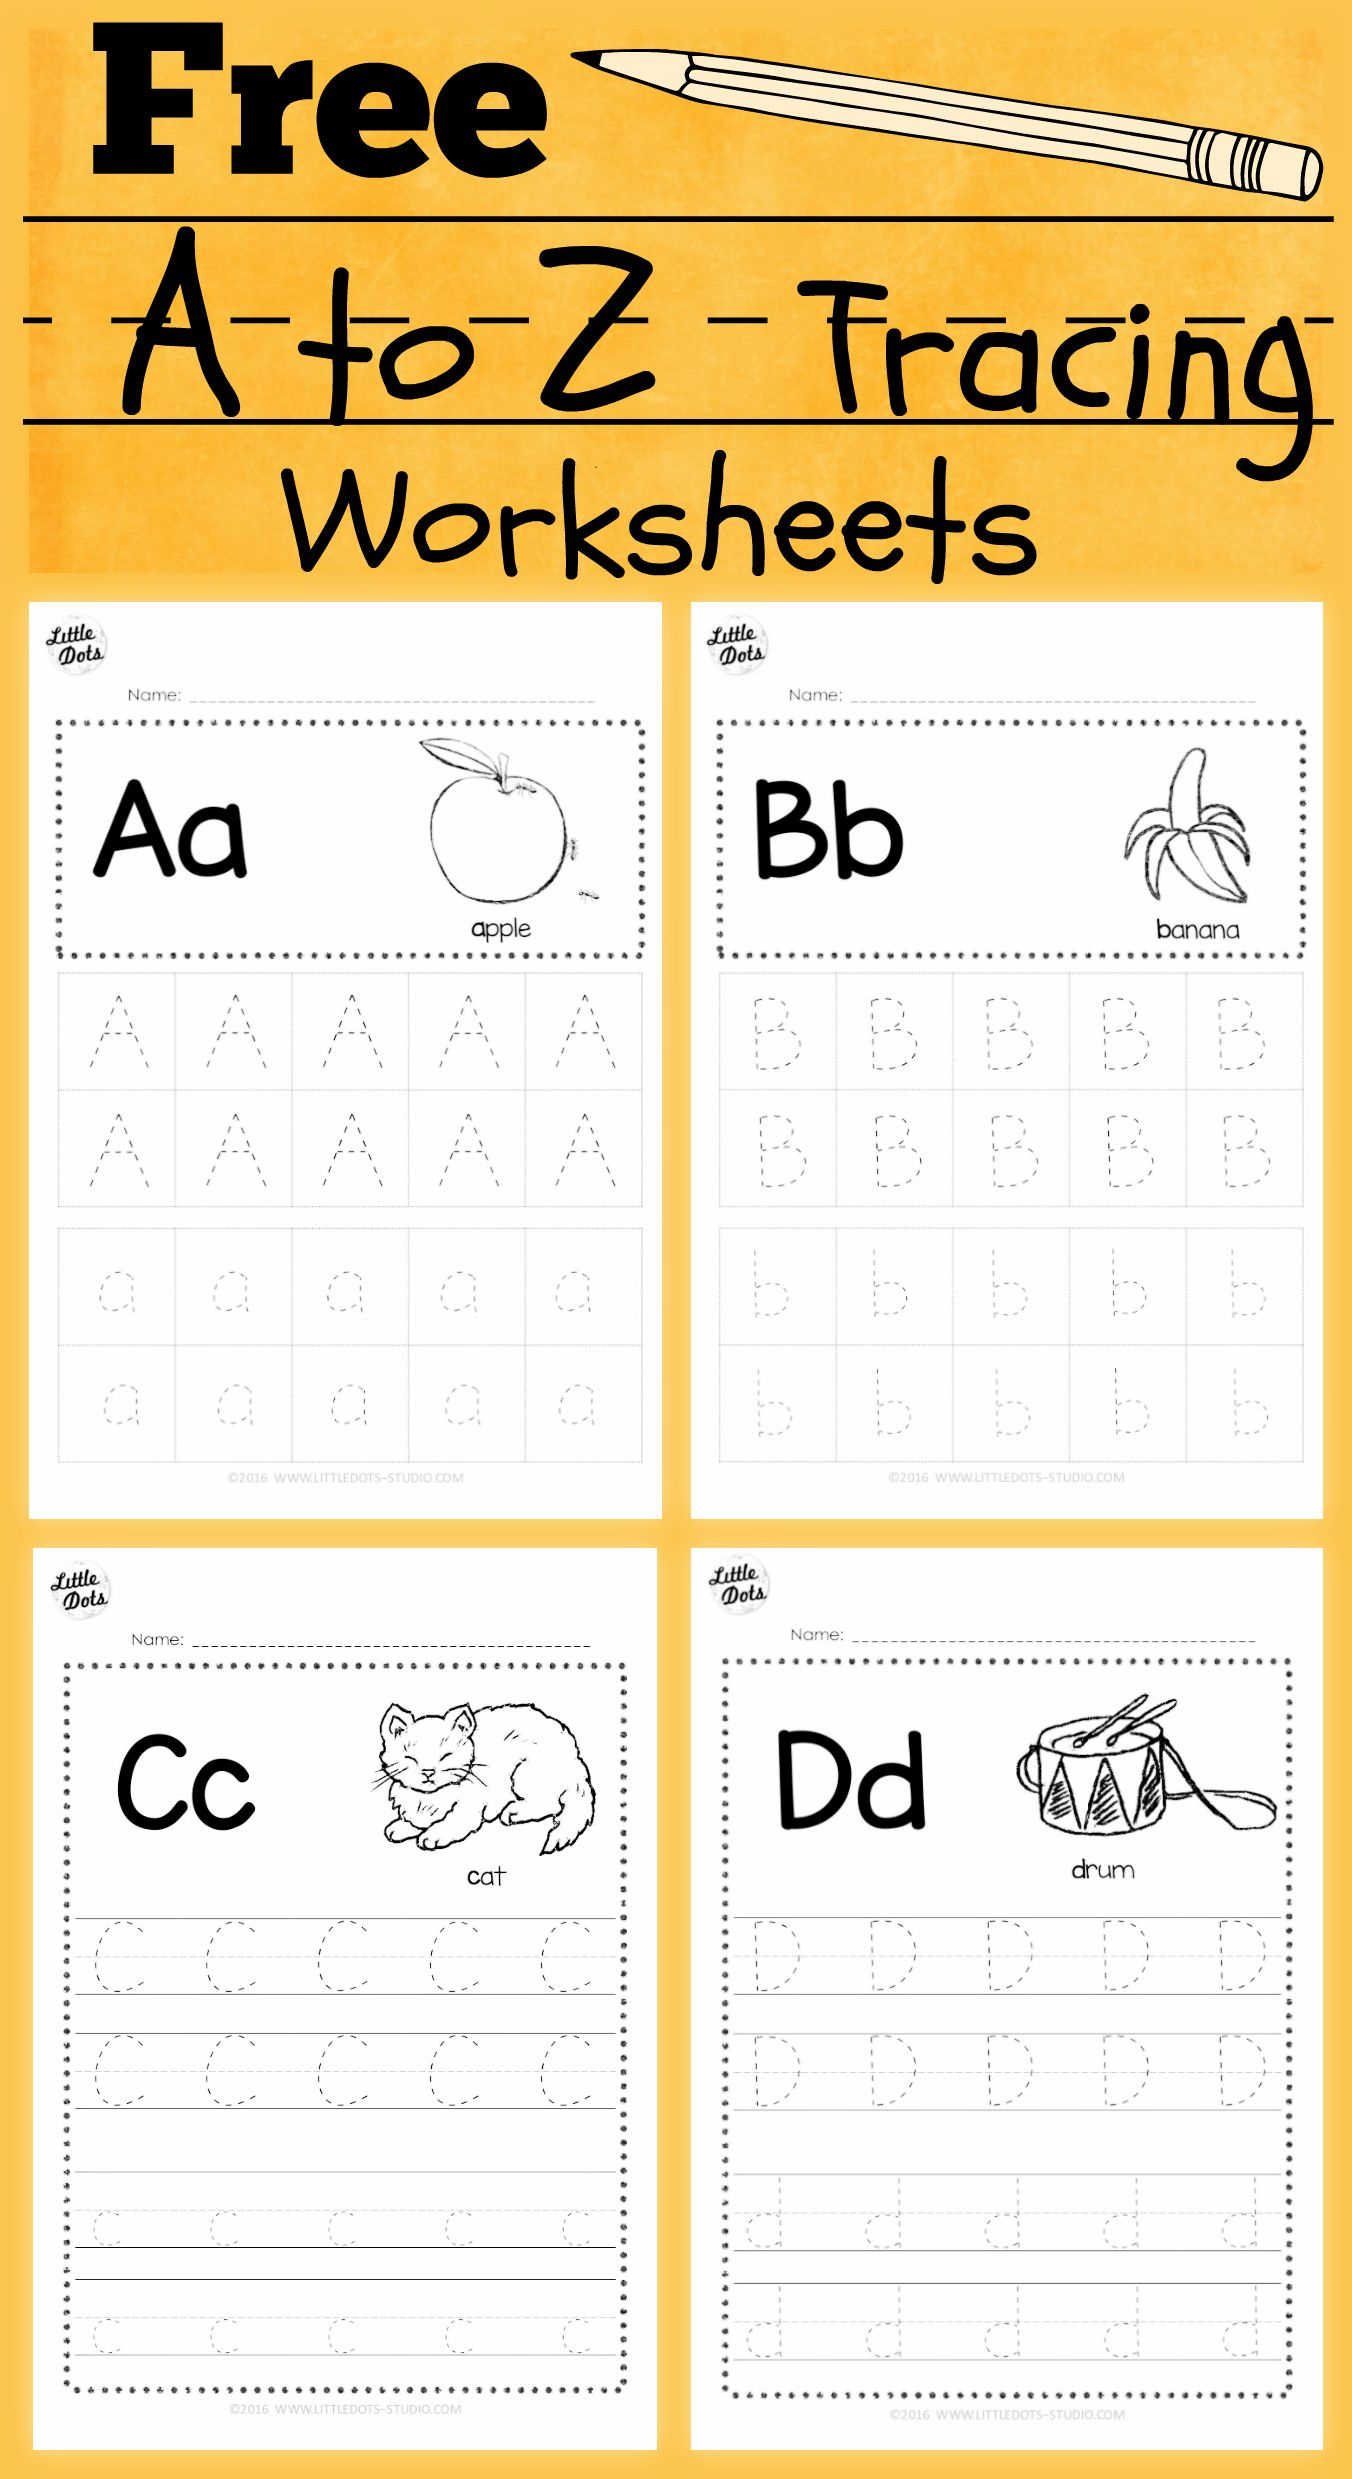 Download Free Alphabet Tracing Worksheets For Letter A To Z within Alphabet Tracing Worksheets For 2 Year Olds